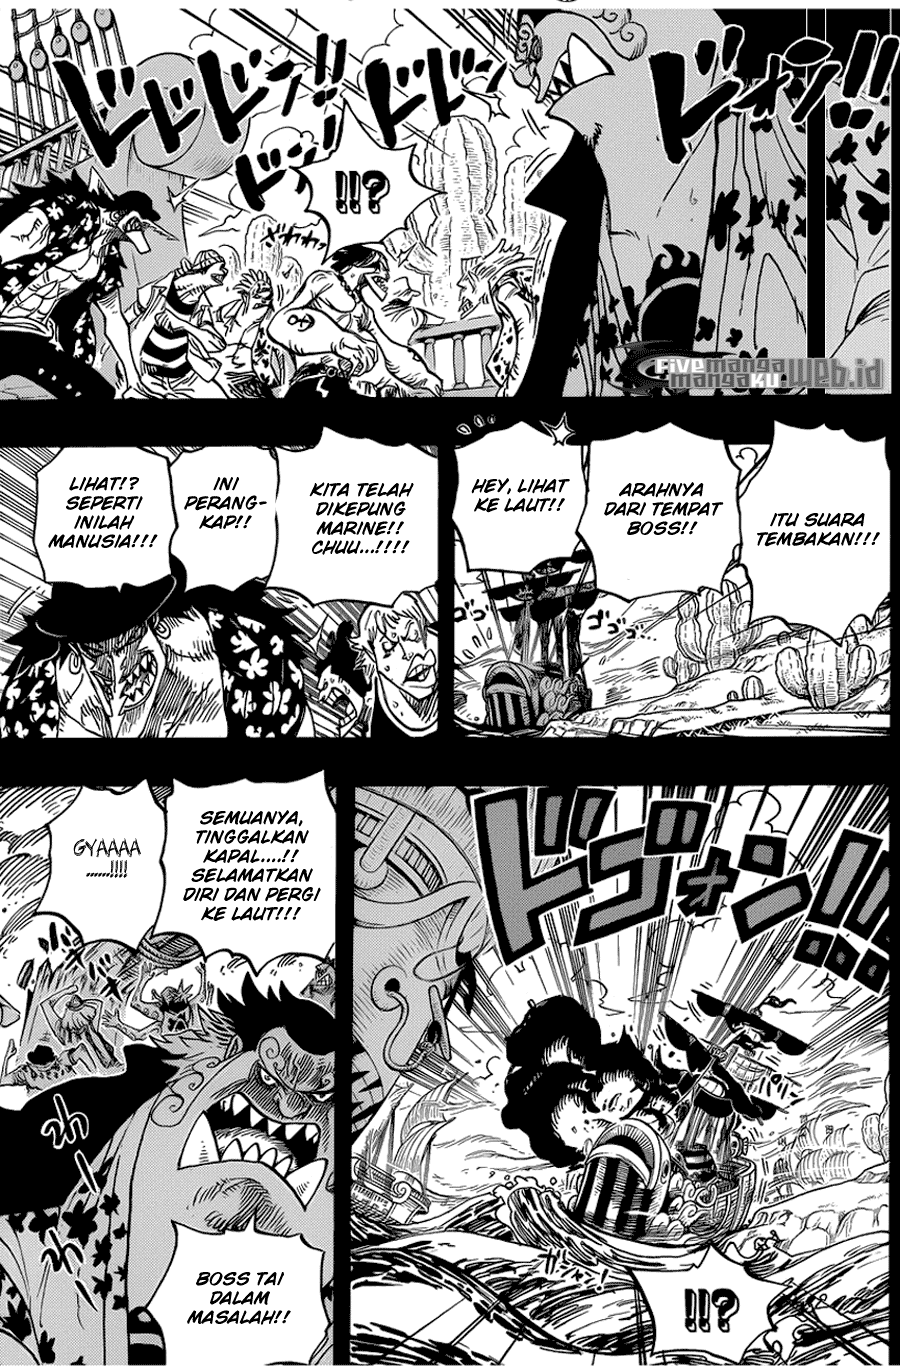 One Piece Chapter 623 – si bajak laut fisher tiger Image 10